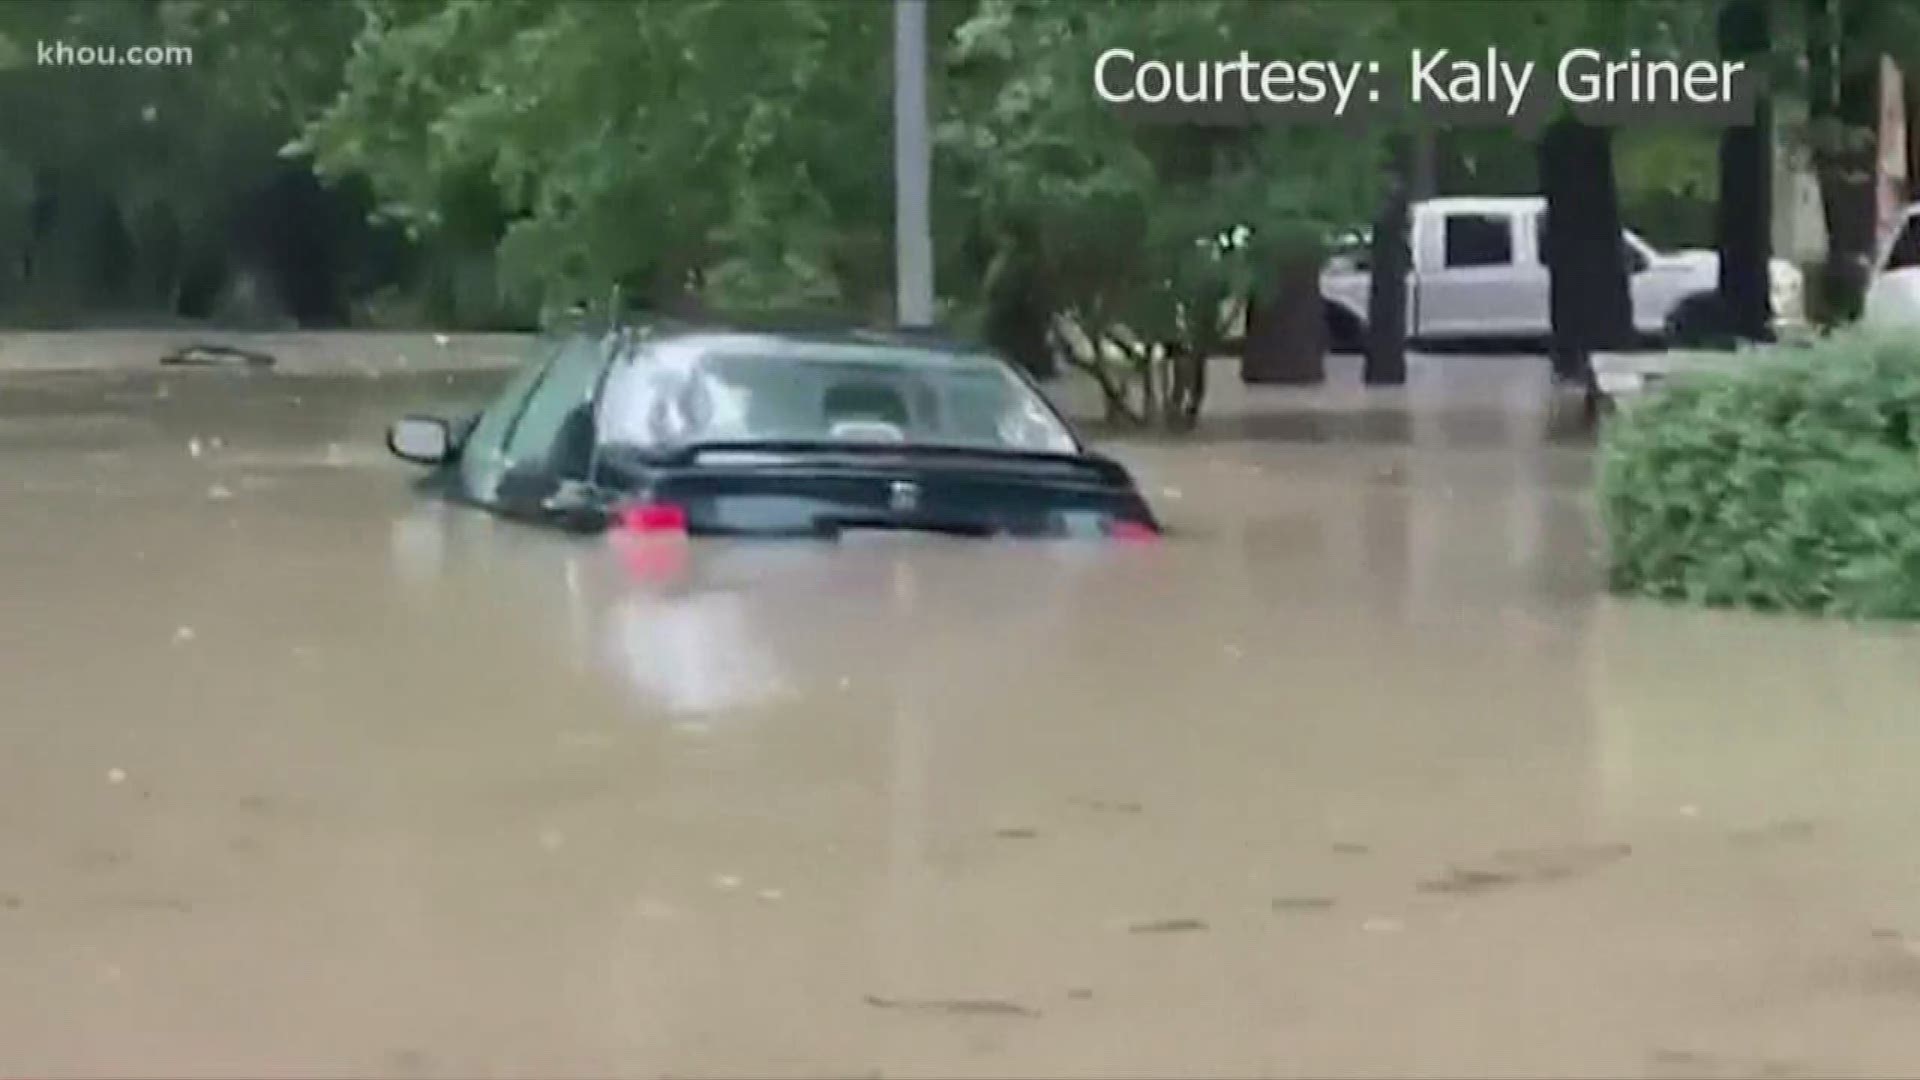 Driving in even just 6 inches of floodwater can cause major damage to your car.